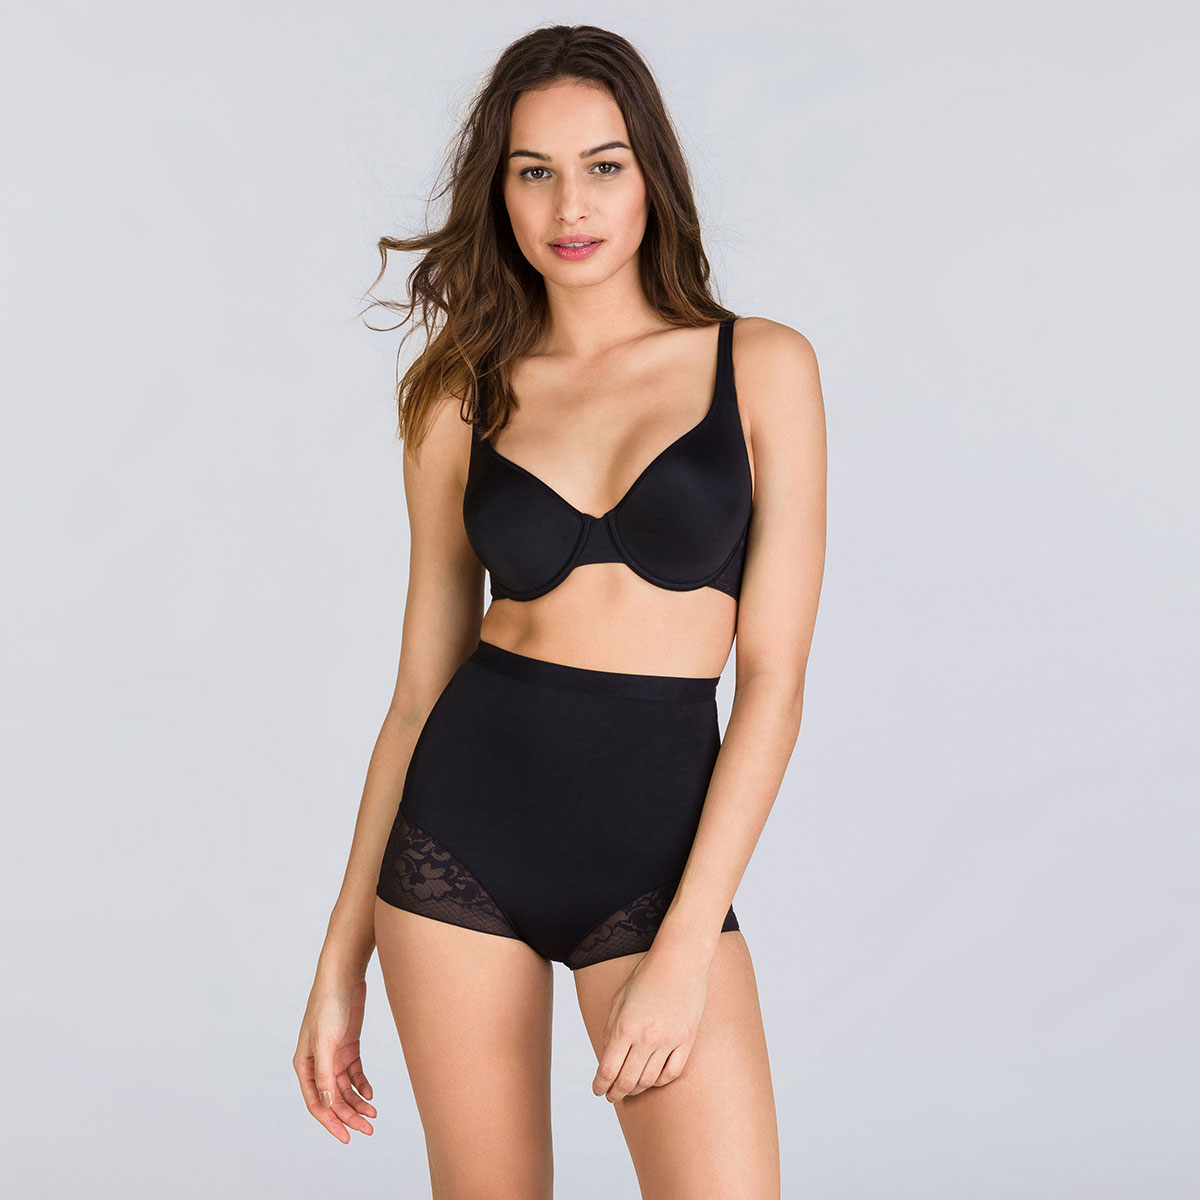 Black High-Waisted Girdle - Expert in Silhouette